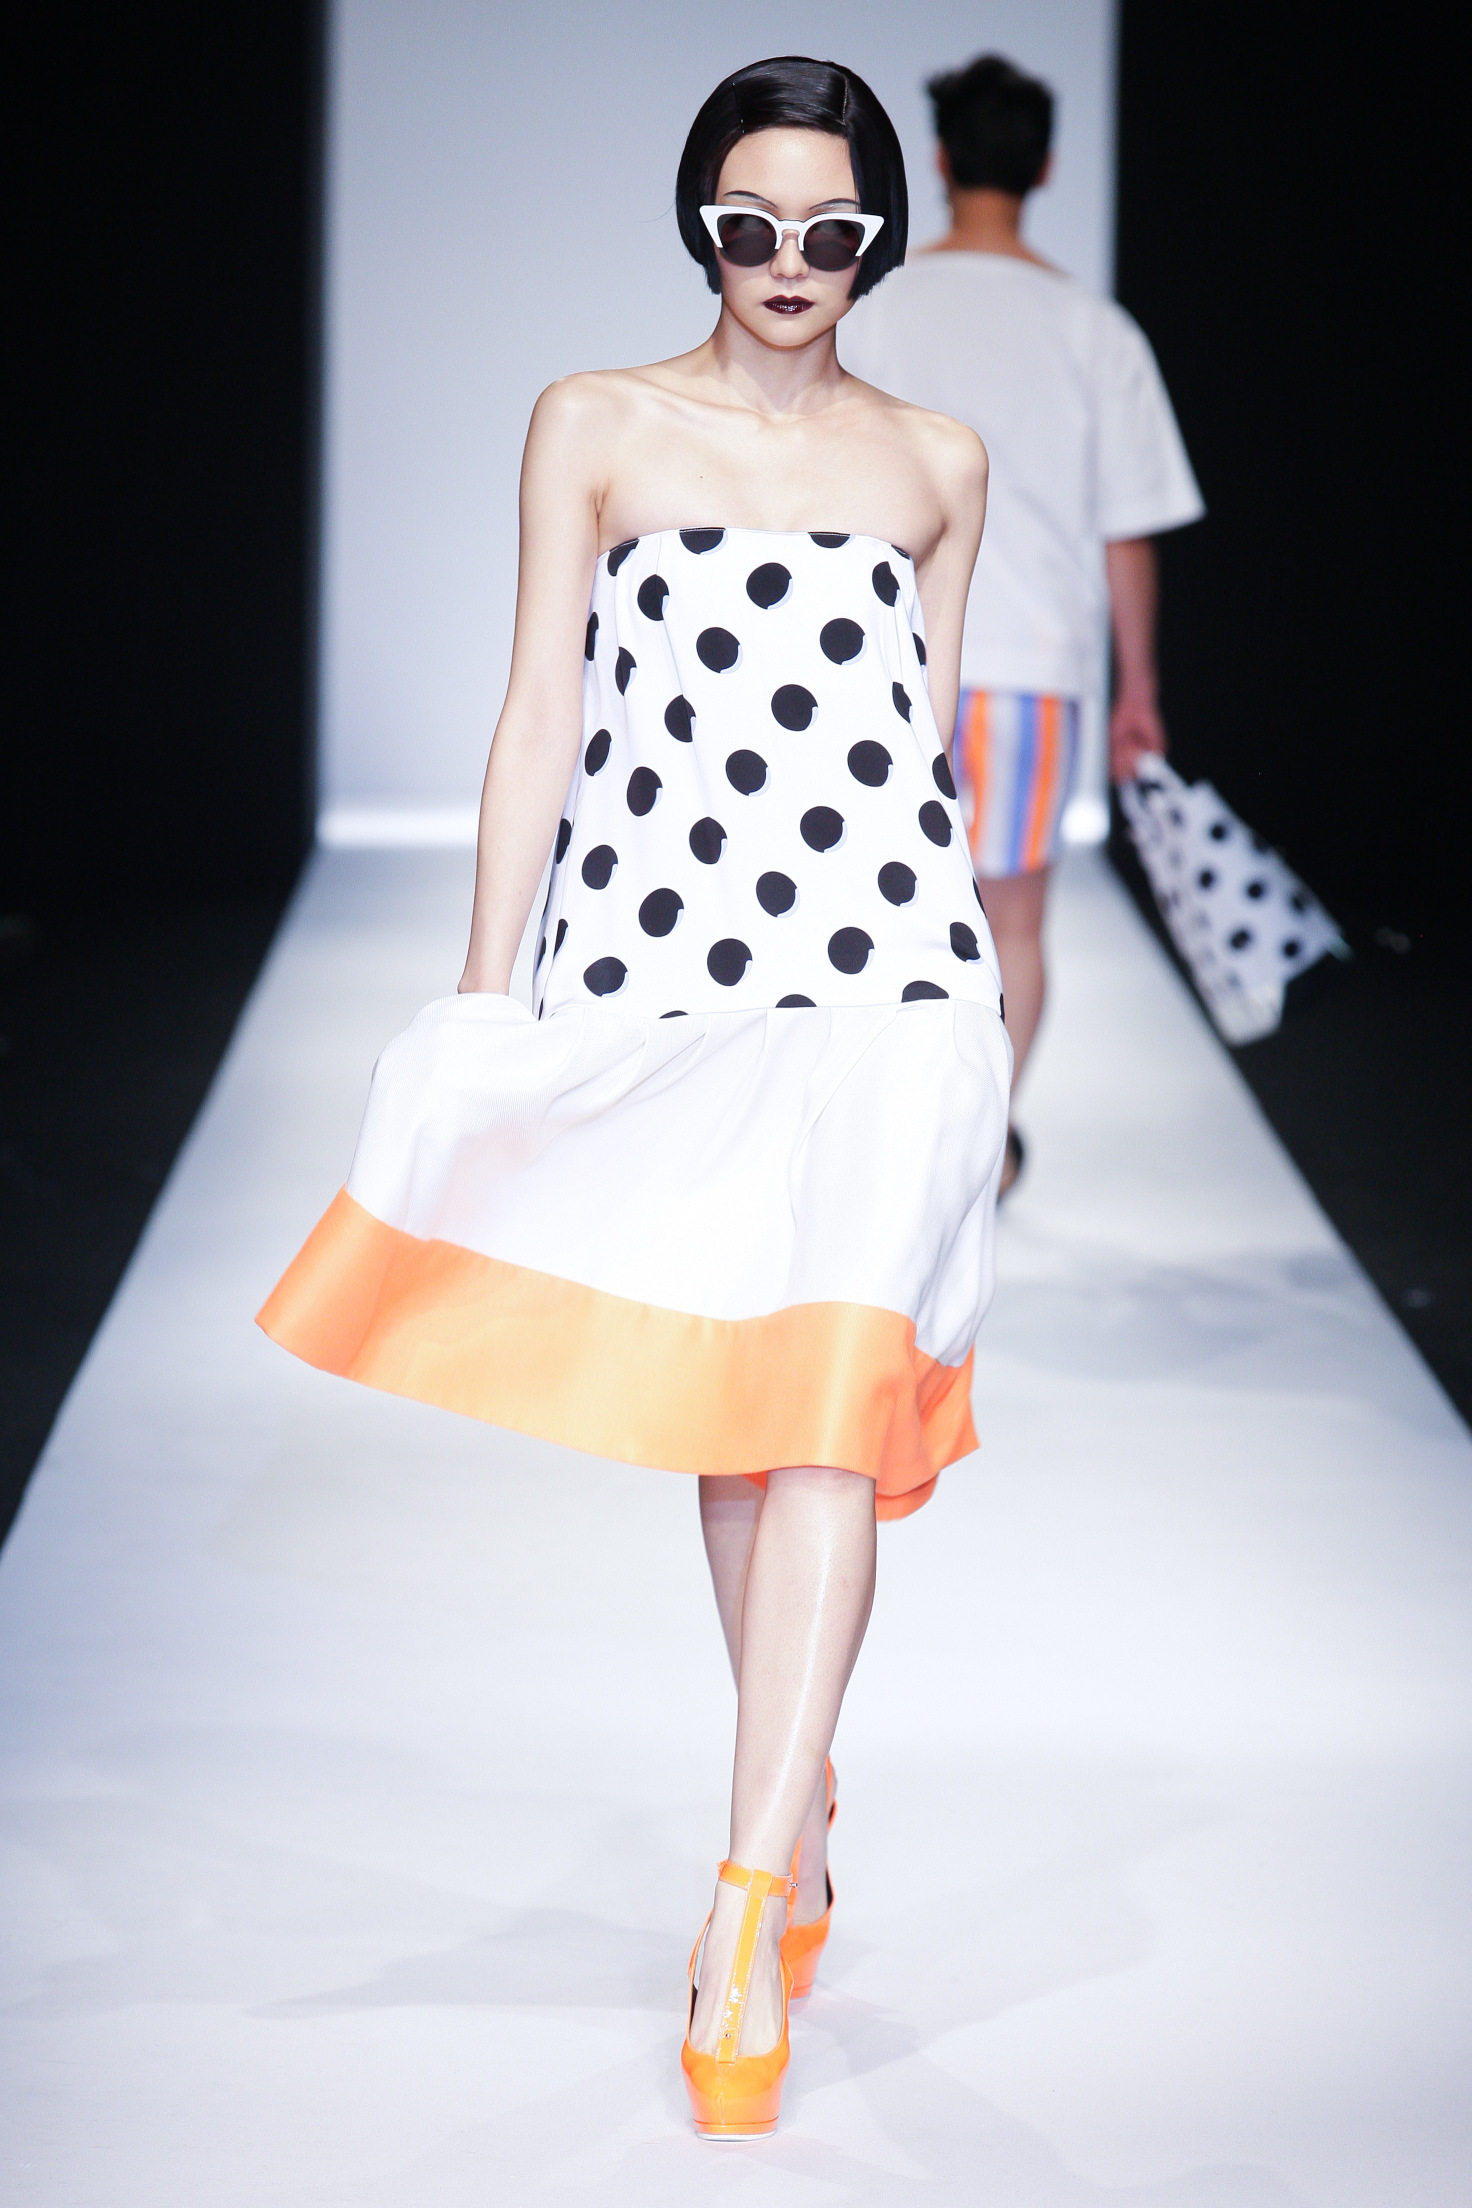 Heart and Seoul of fashion: Korean opportunities | South China Morning Post